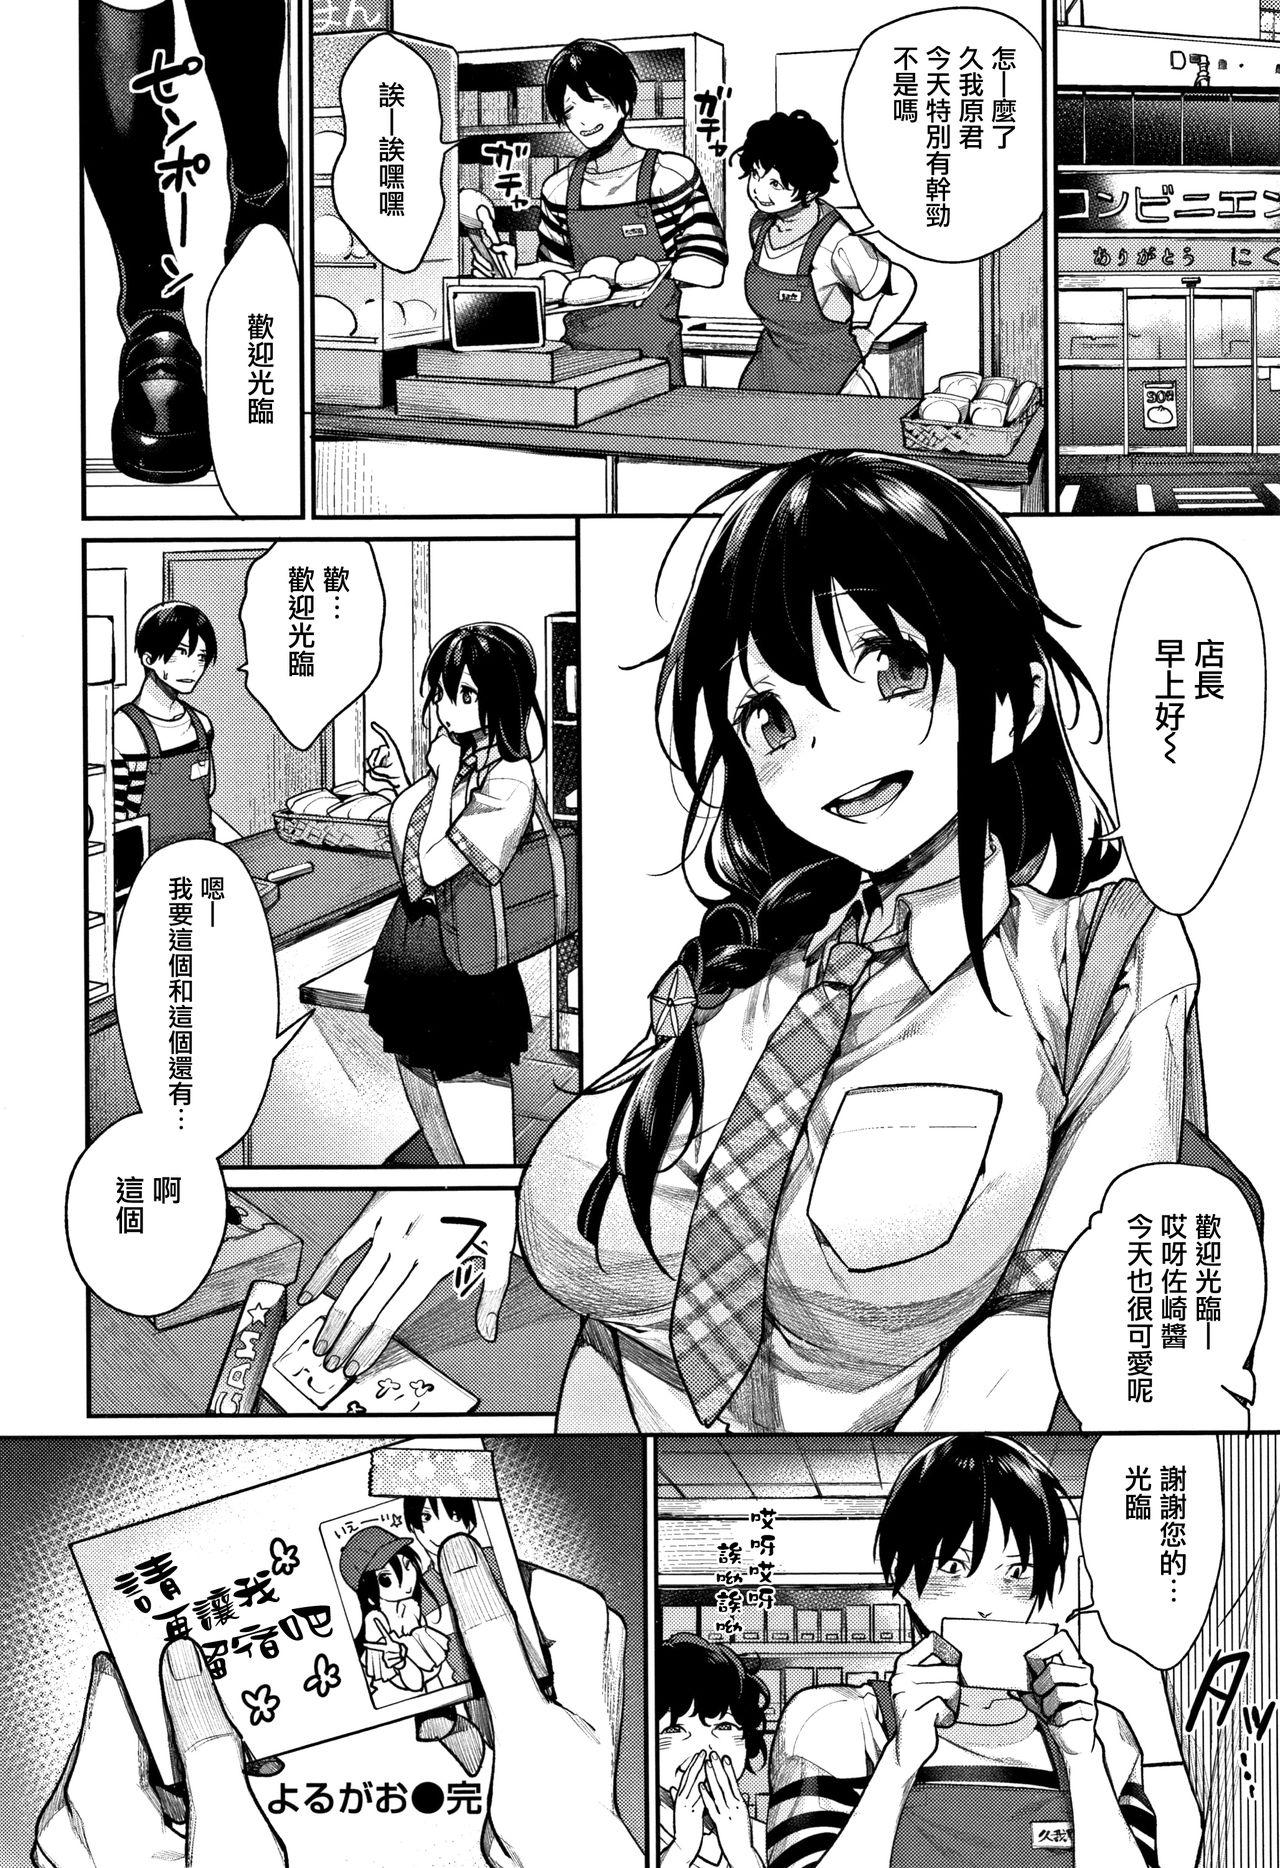 Massages [MGMEE] Bokura no Etude - Our H Chu Do Ch.1-6 [Chinese] [無邪気漢化組] Amateur Blowjob - Page 154